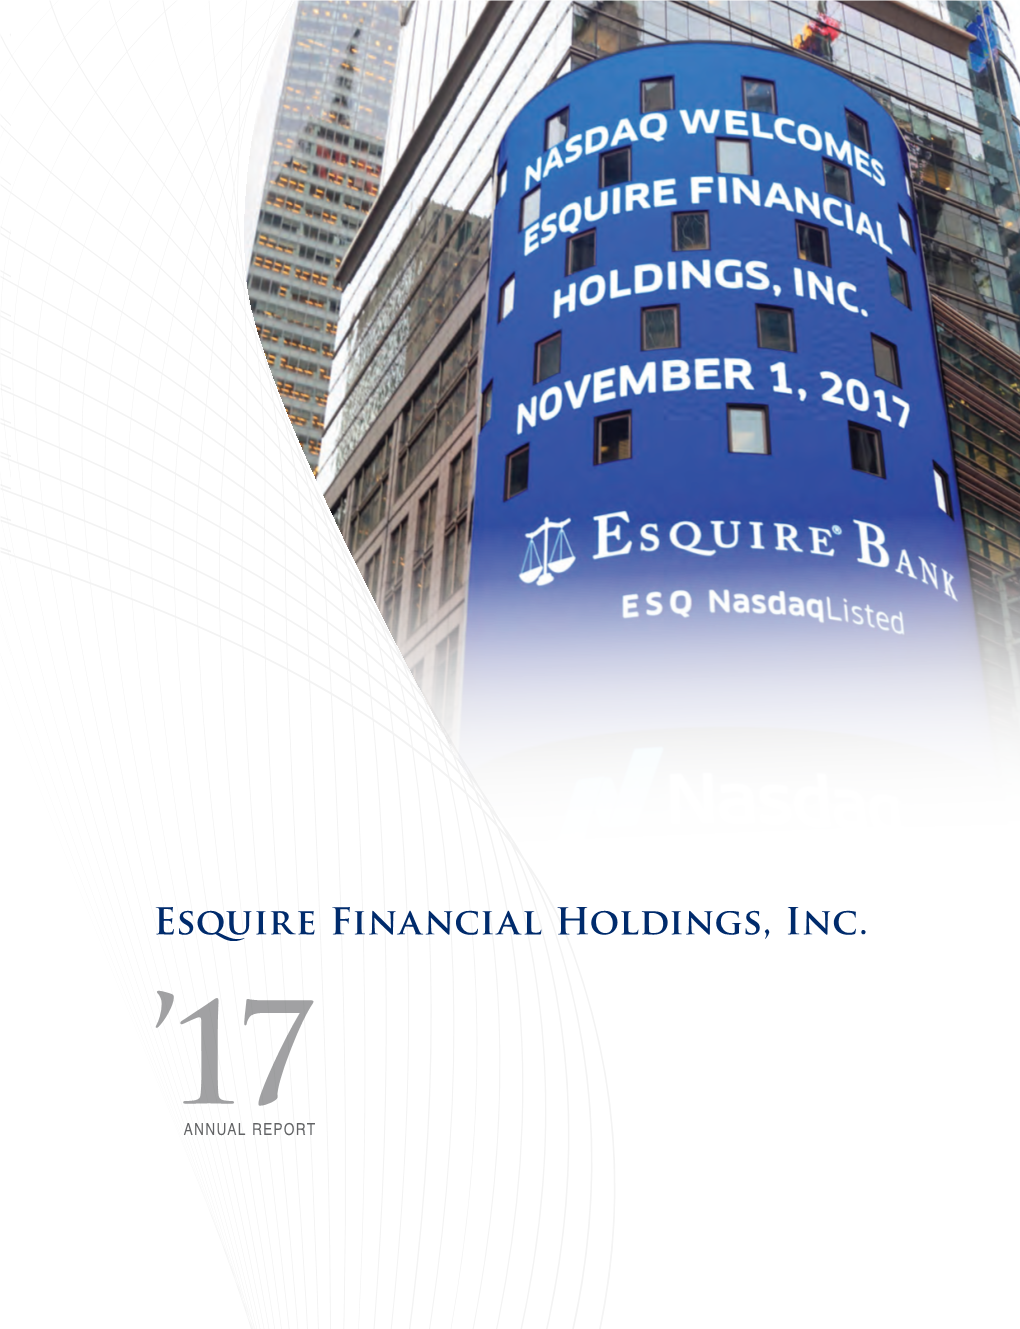 Esquire Financial Holdings, Inc. Holdings, Financial Esquire